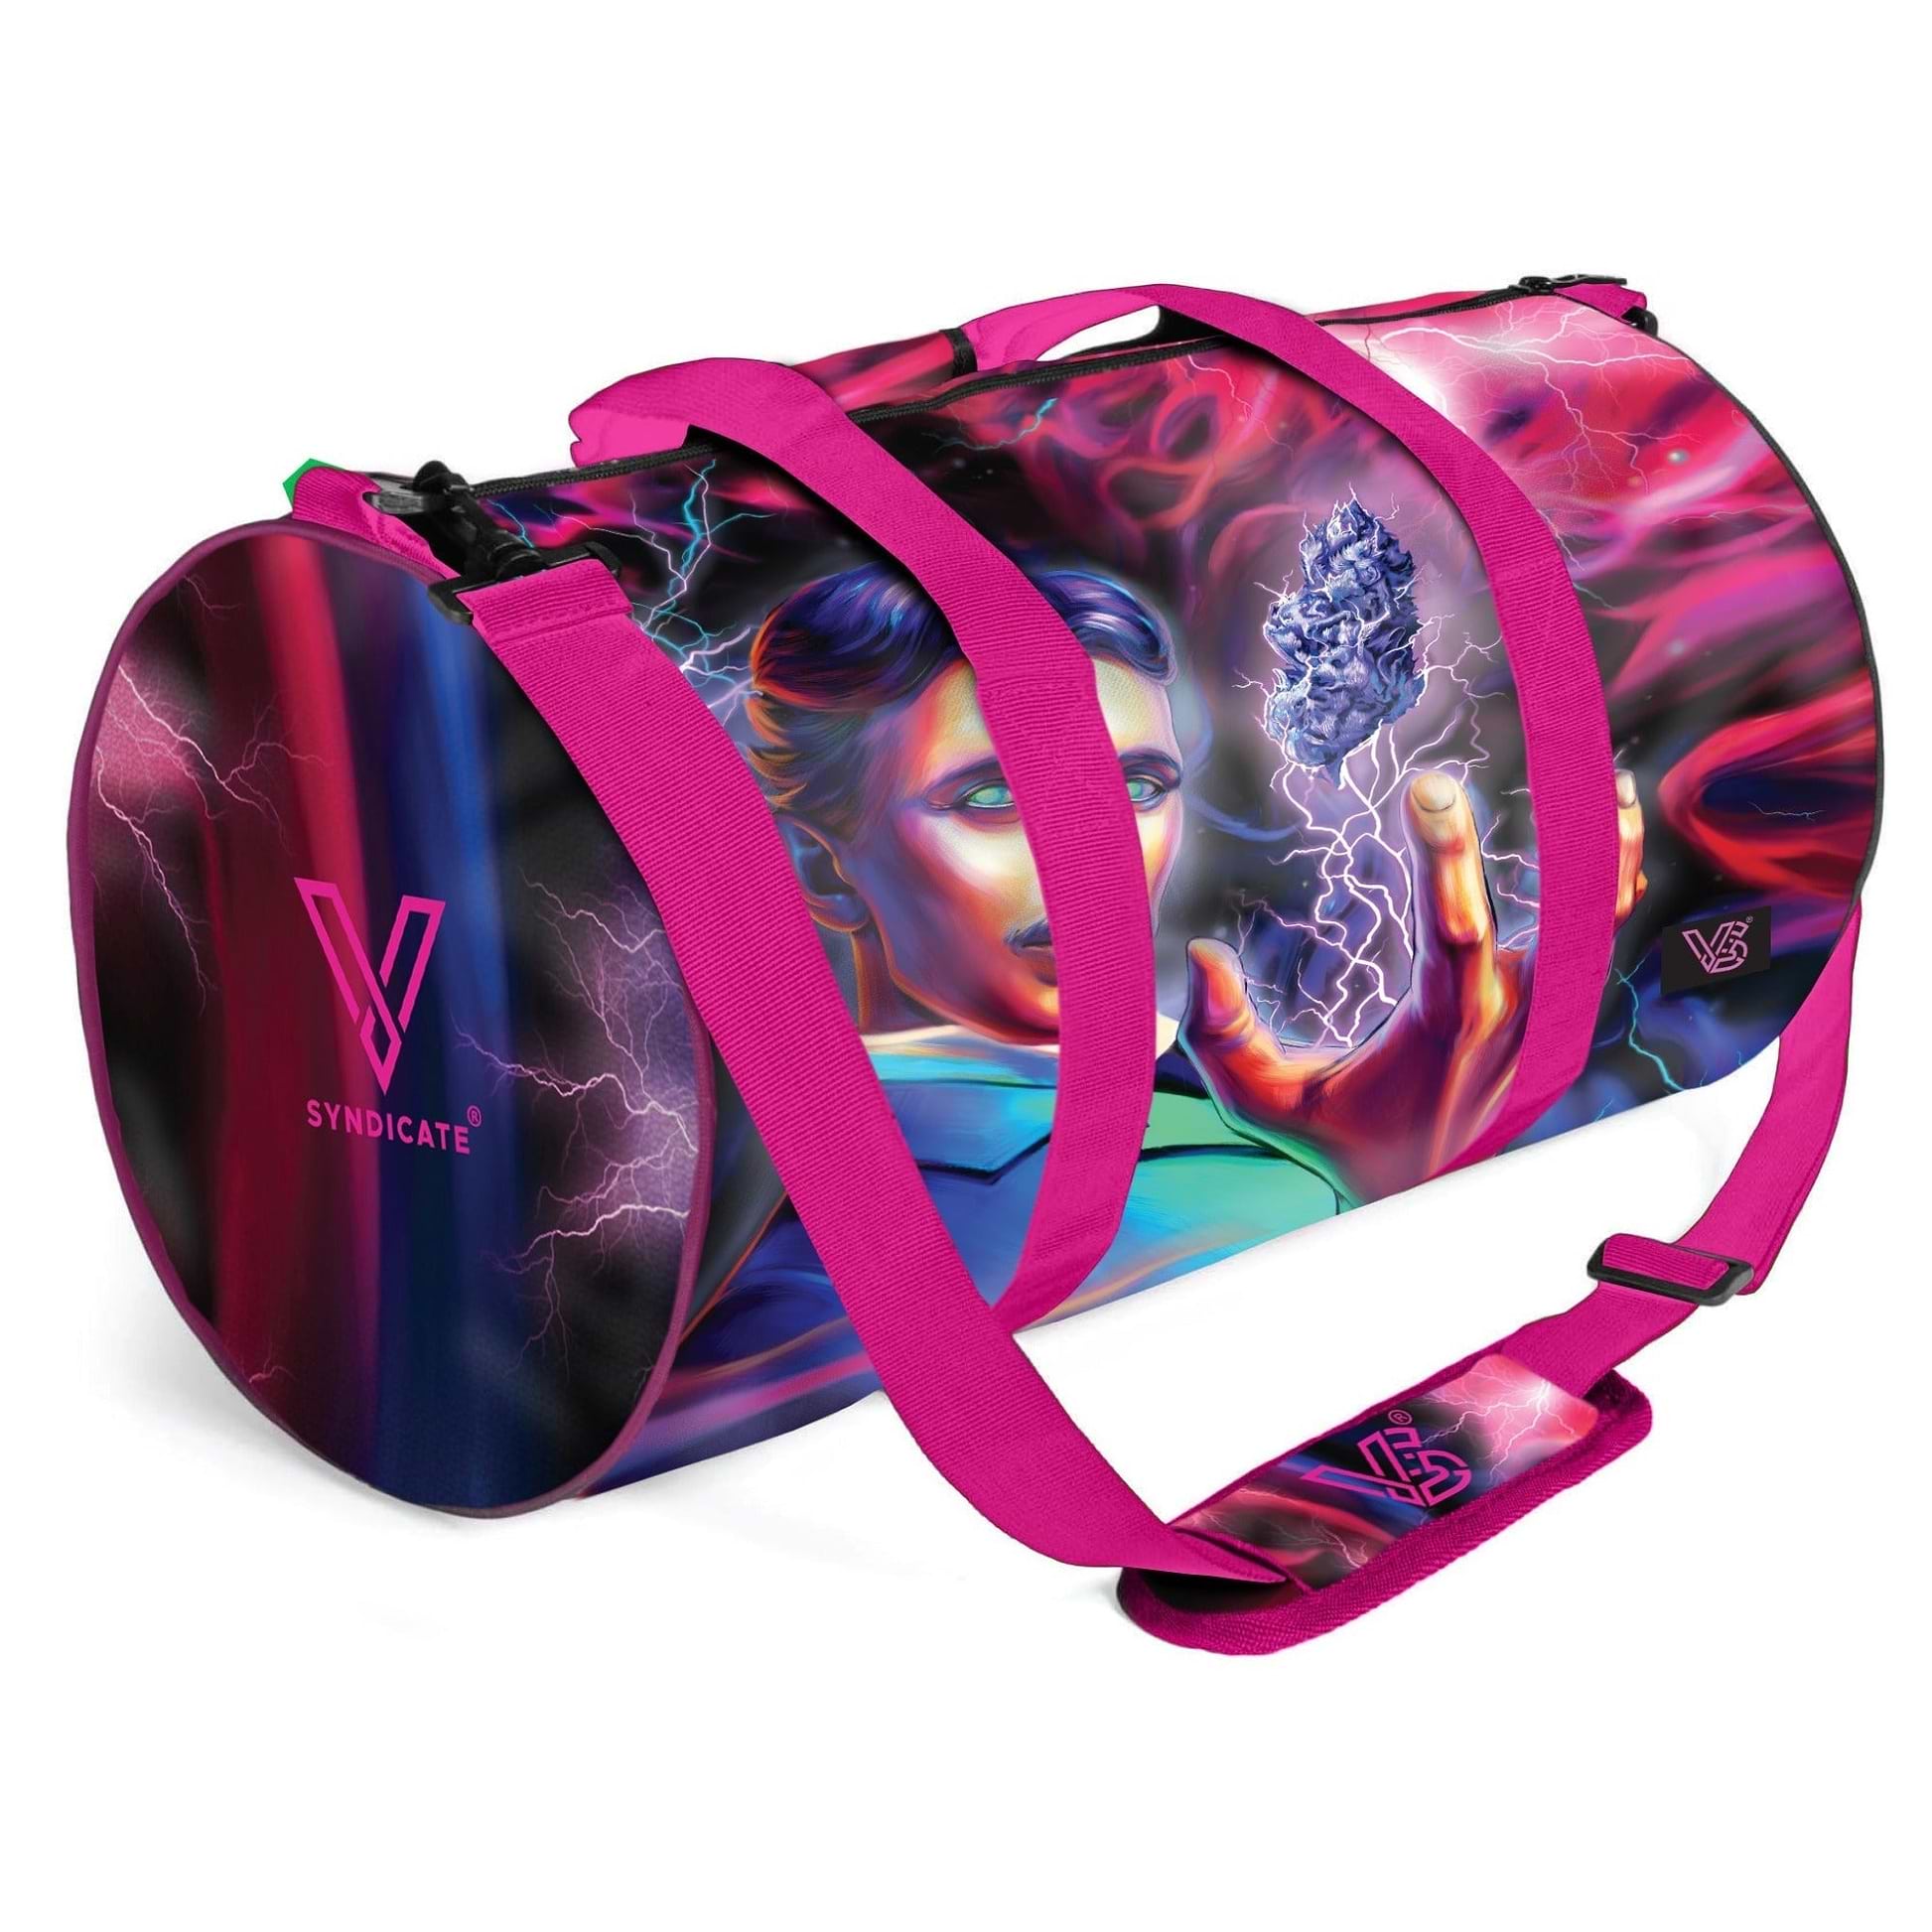 V Syndicate Duffle Bag High Voltage